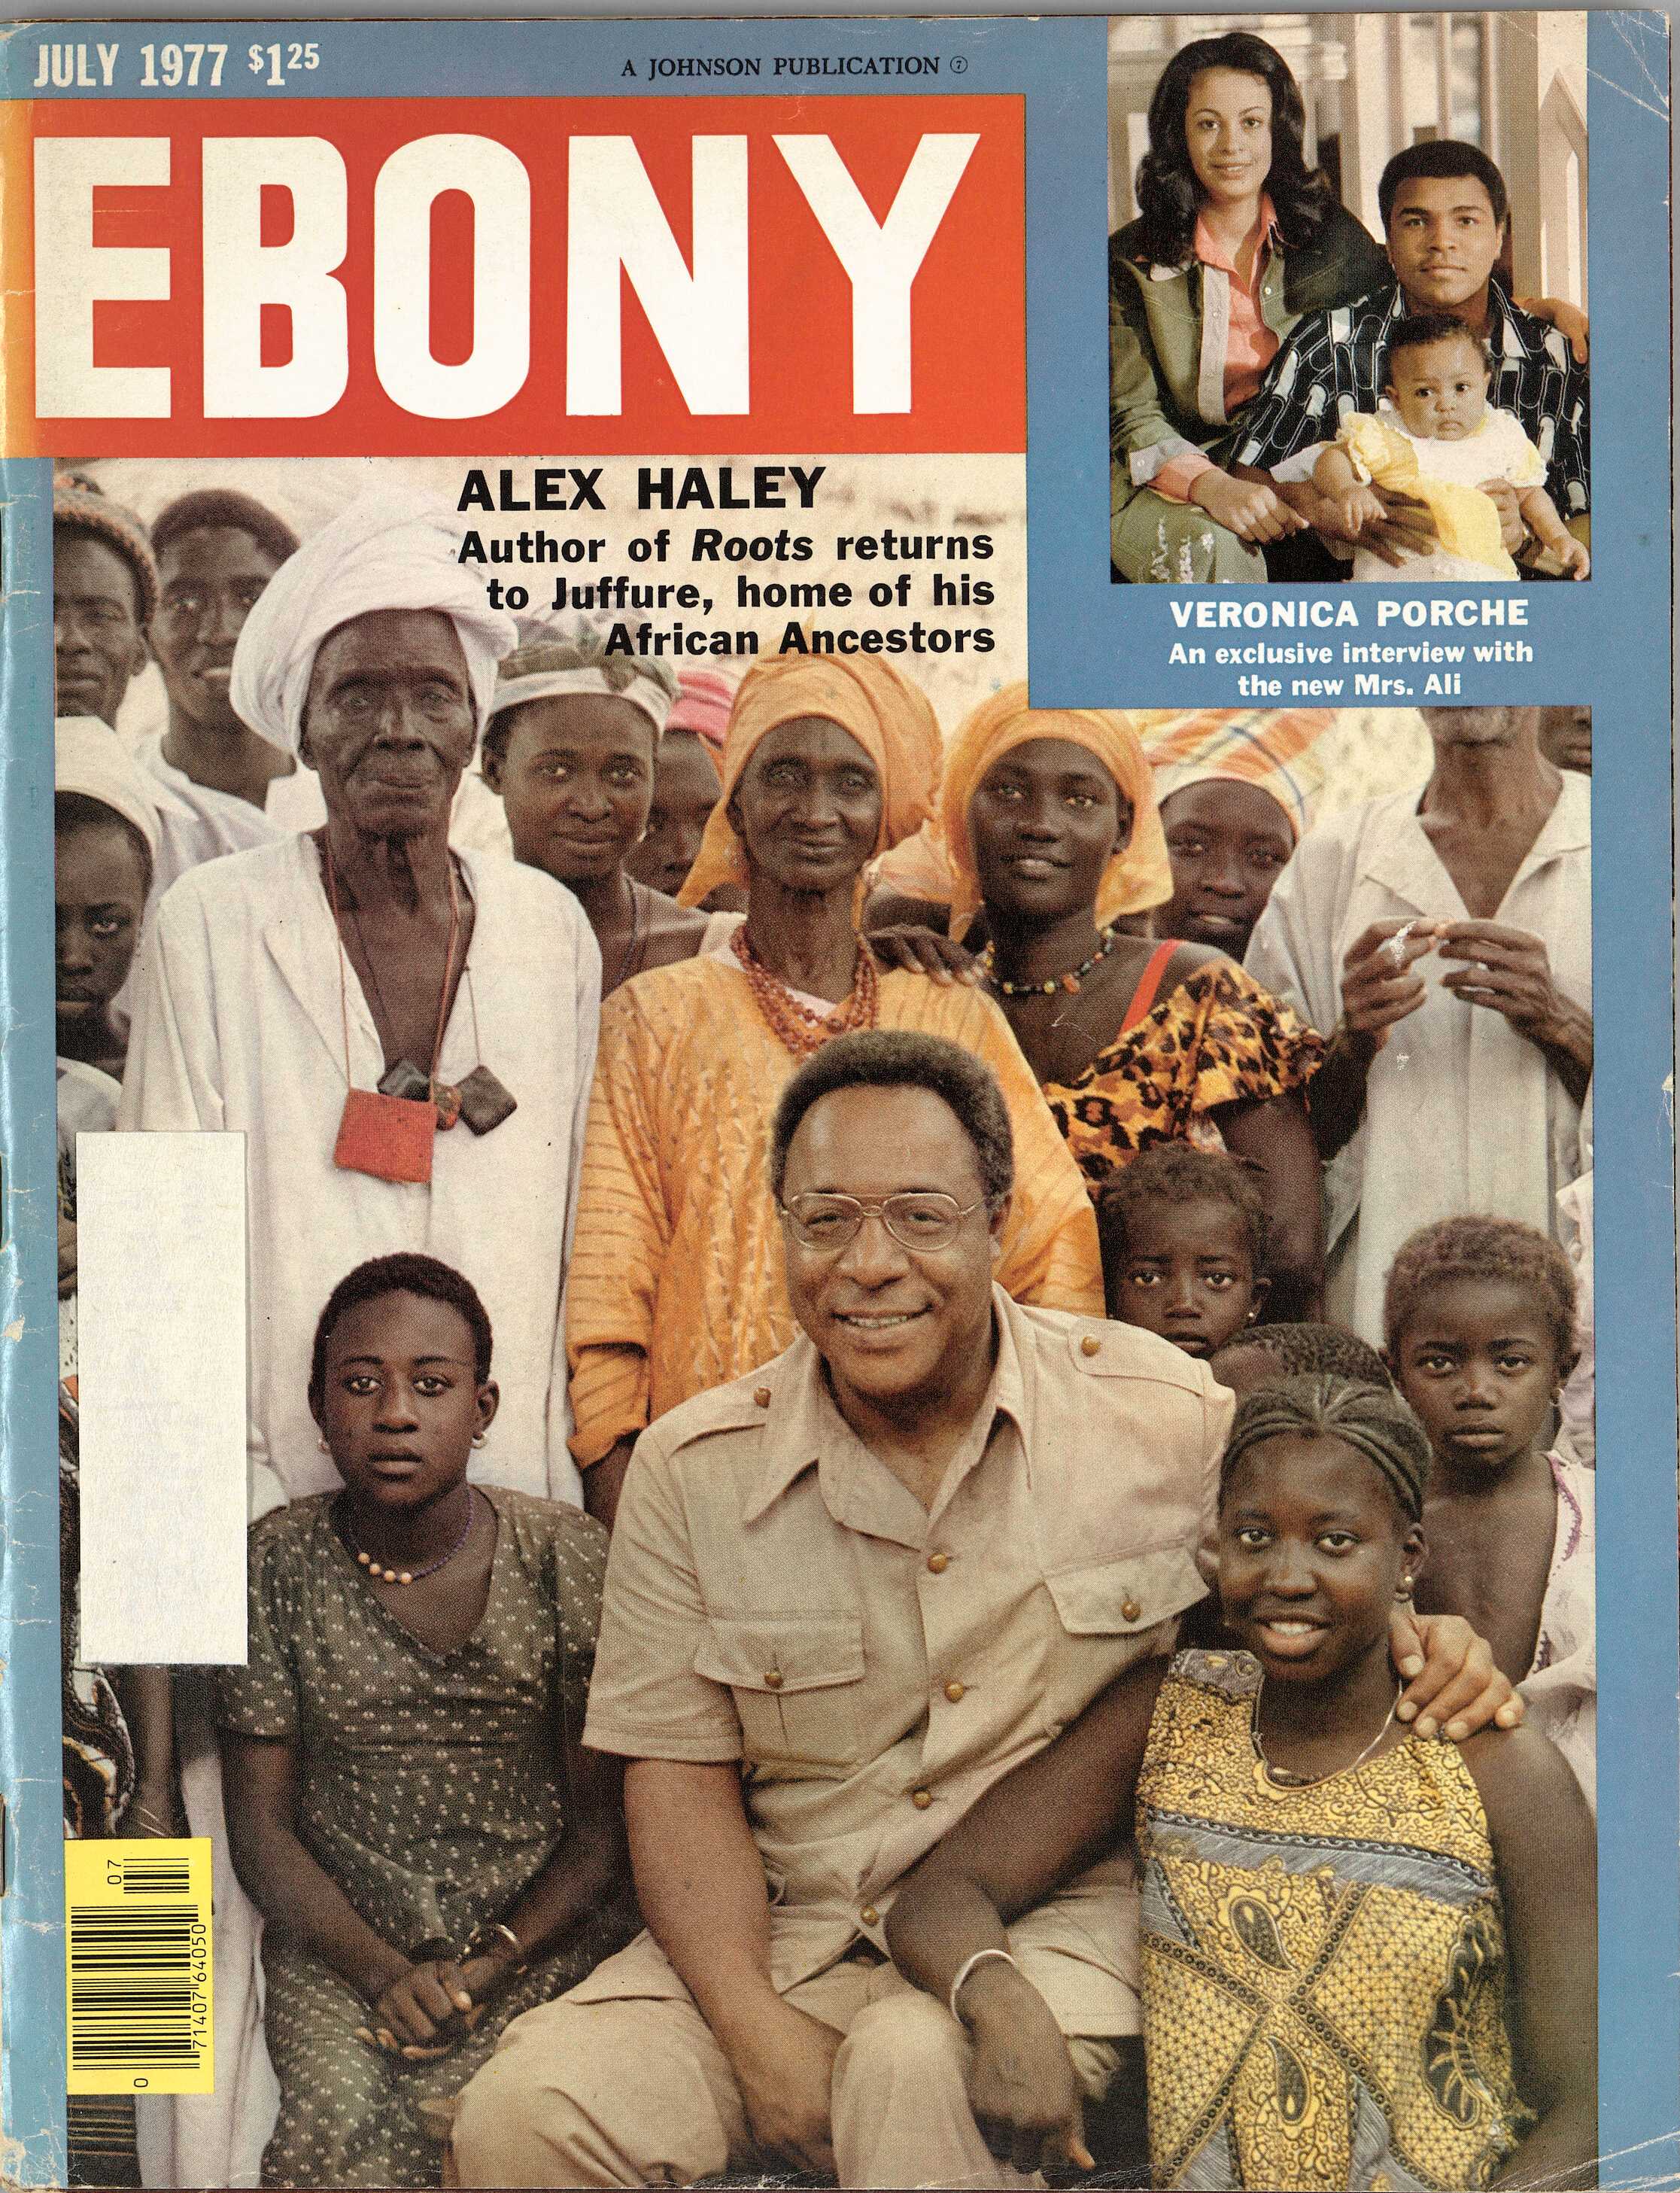 The July 1977 issue of Ebony Magazine featuring Alex Haley on the front cover.